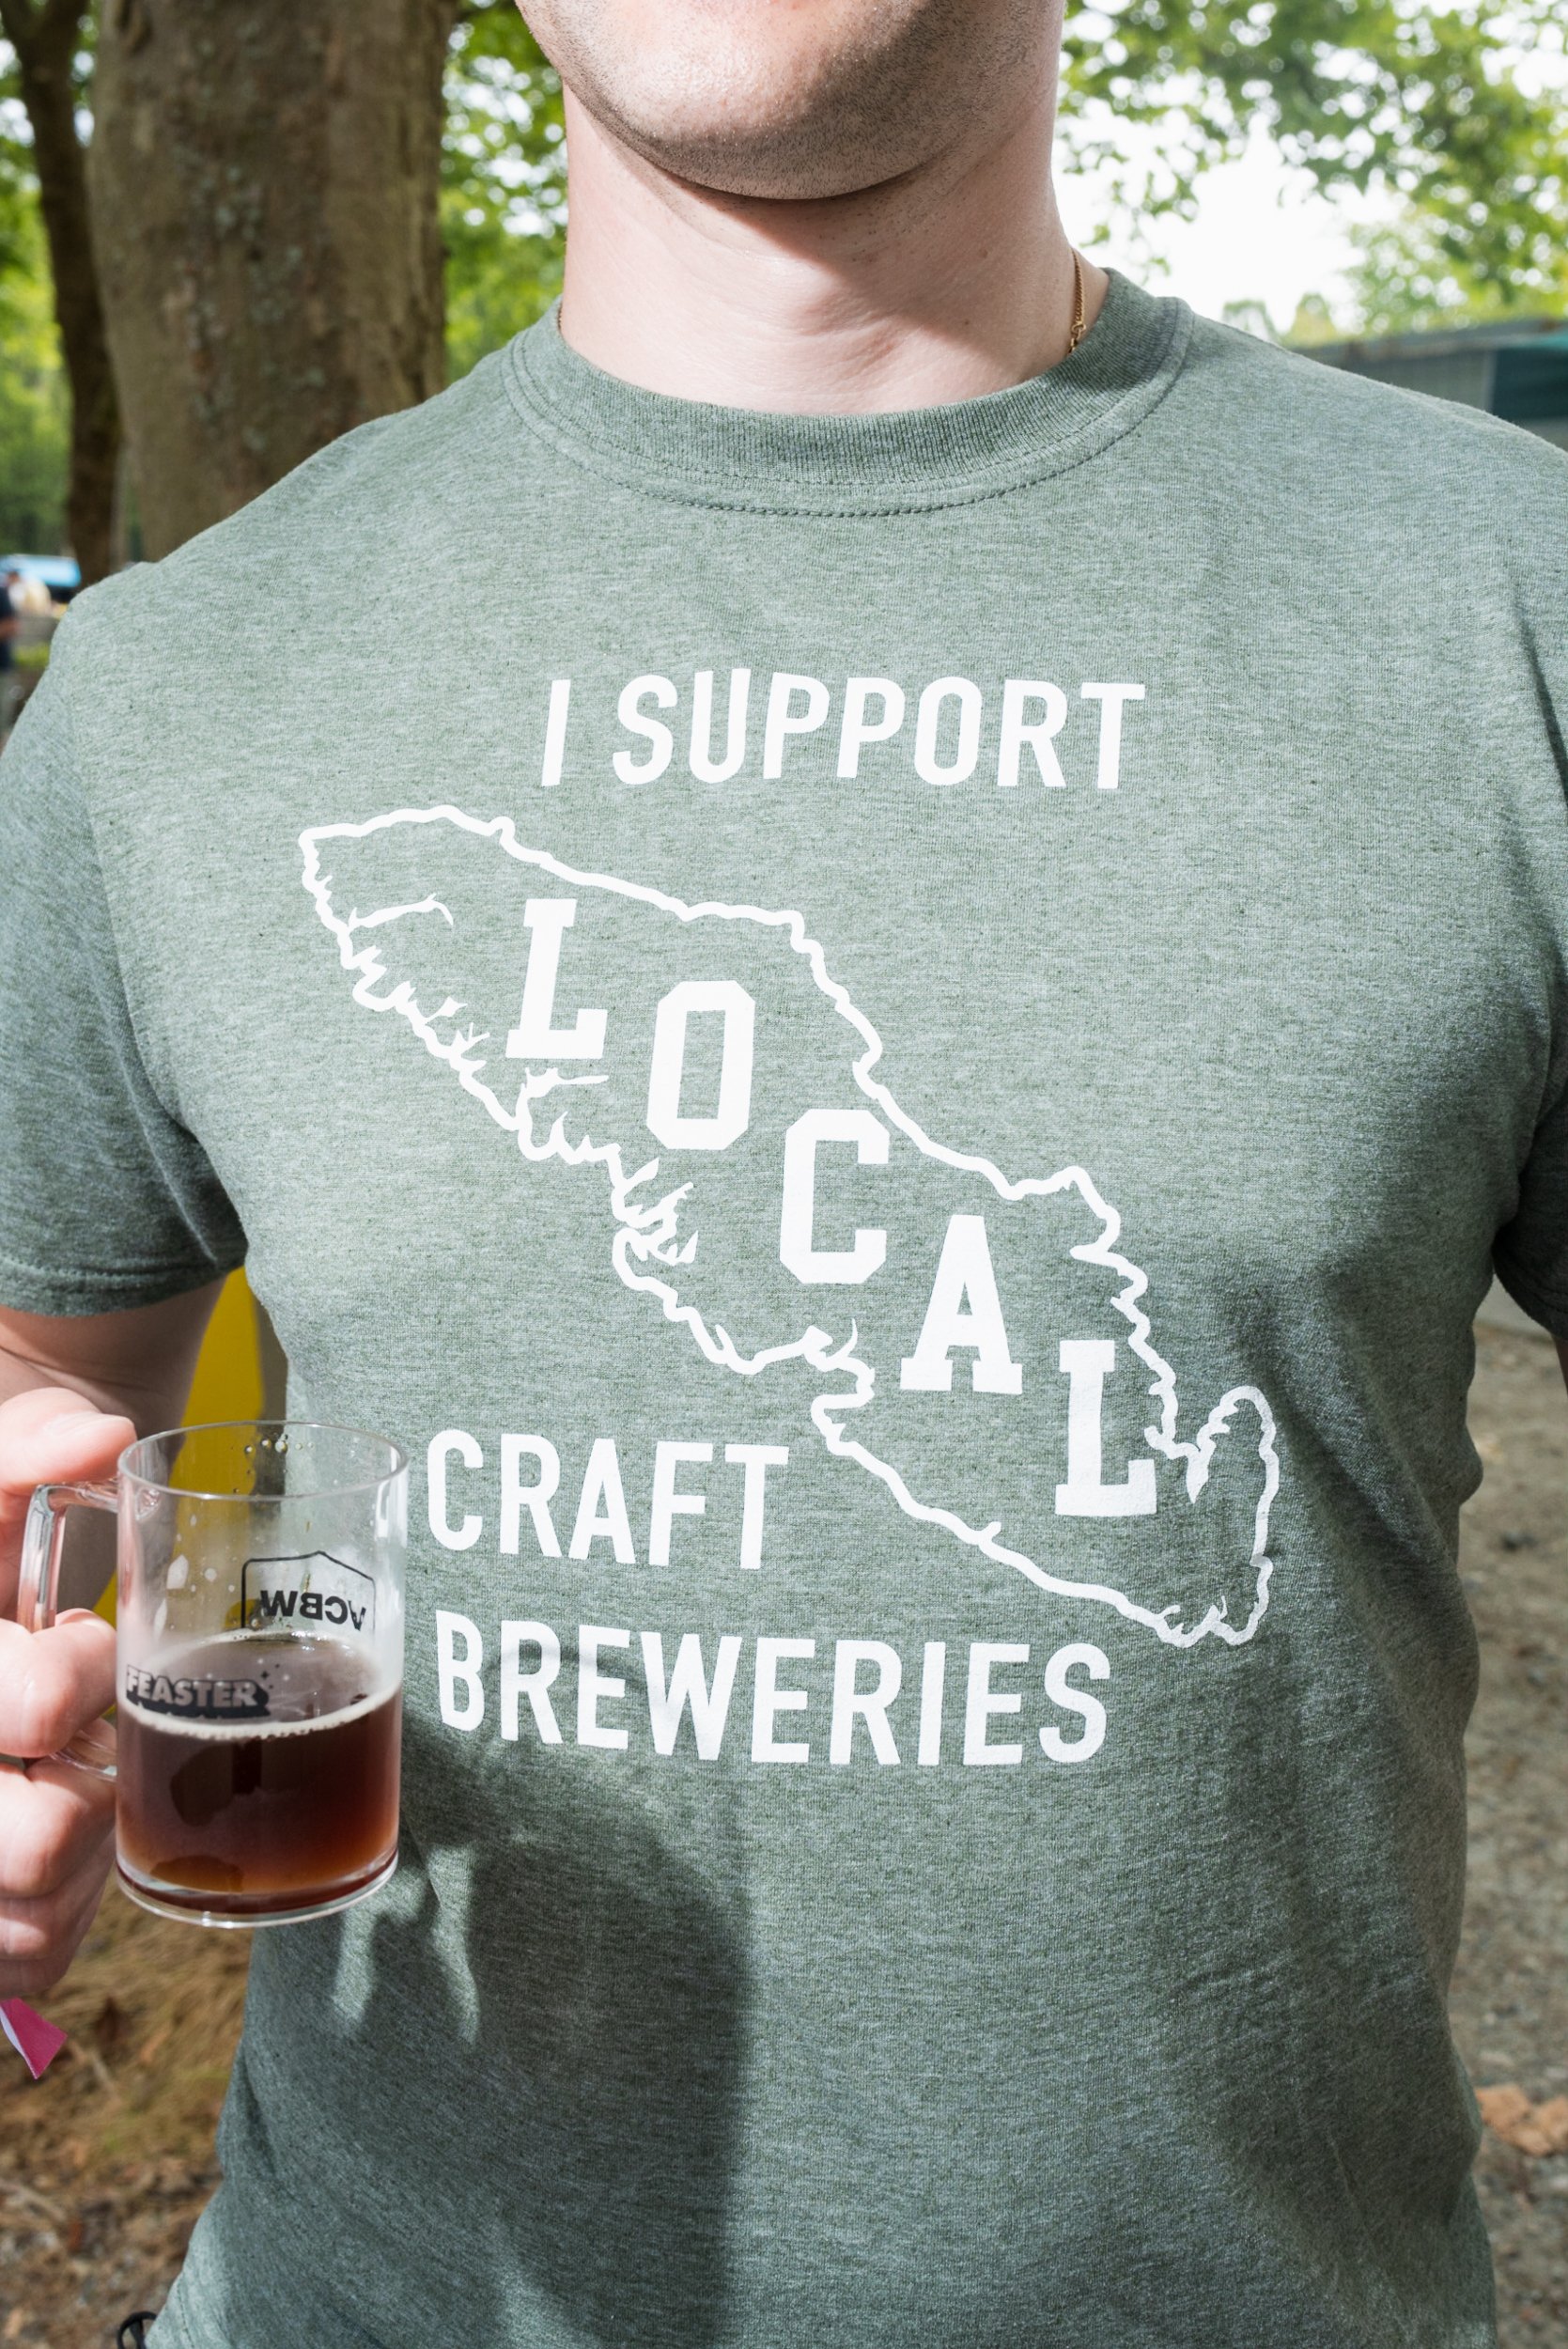 I support local craft breweries t shirt